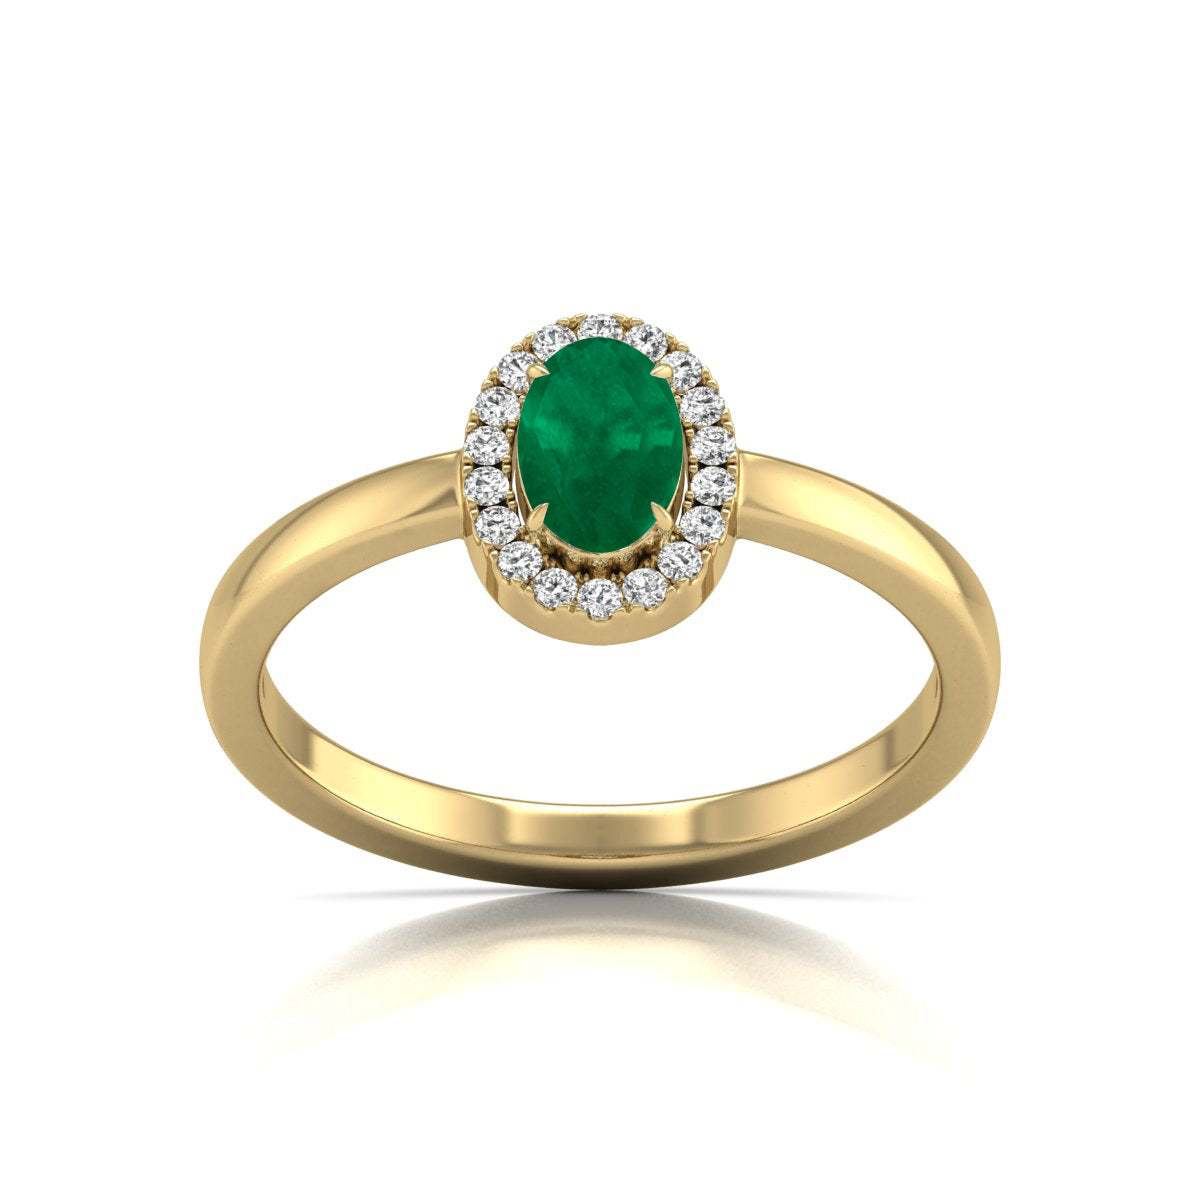 Oval Shape Natural Diamond & Gemstone Ring in 14K White & Yellow Gold